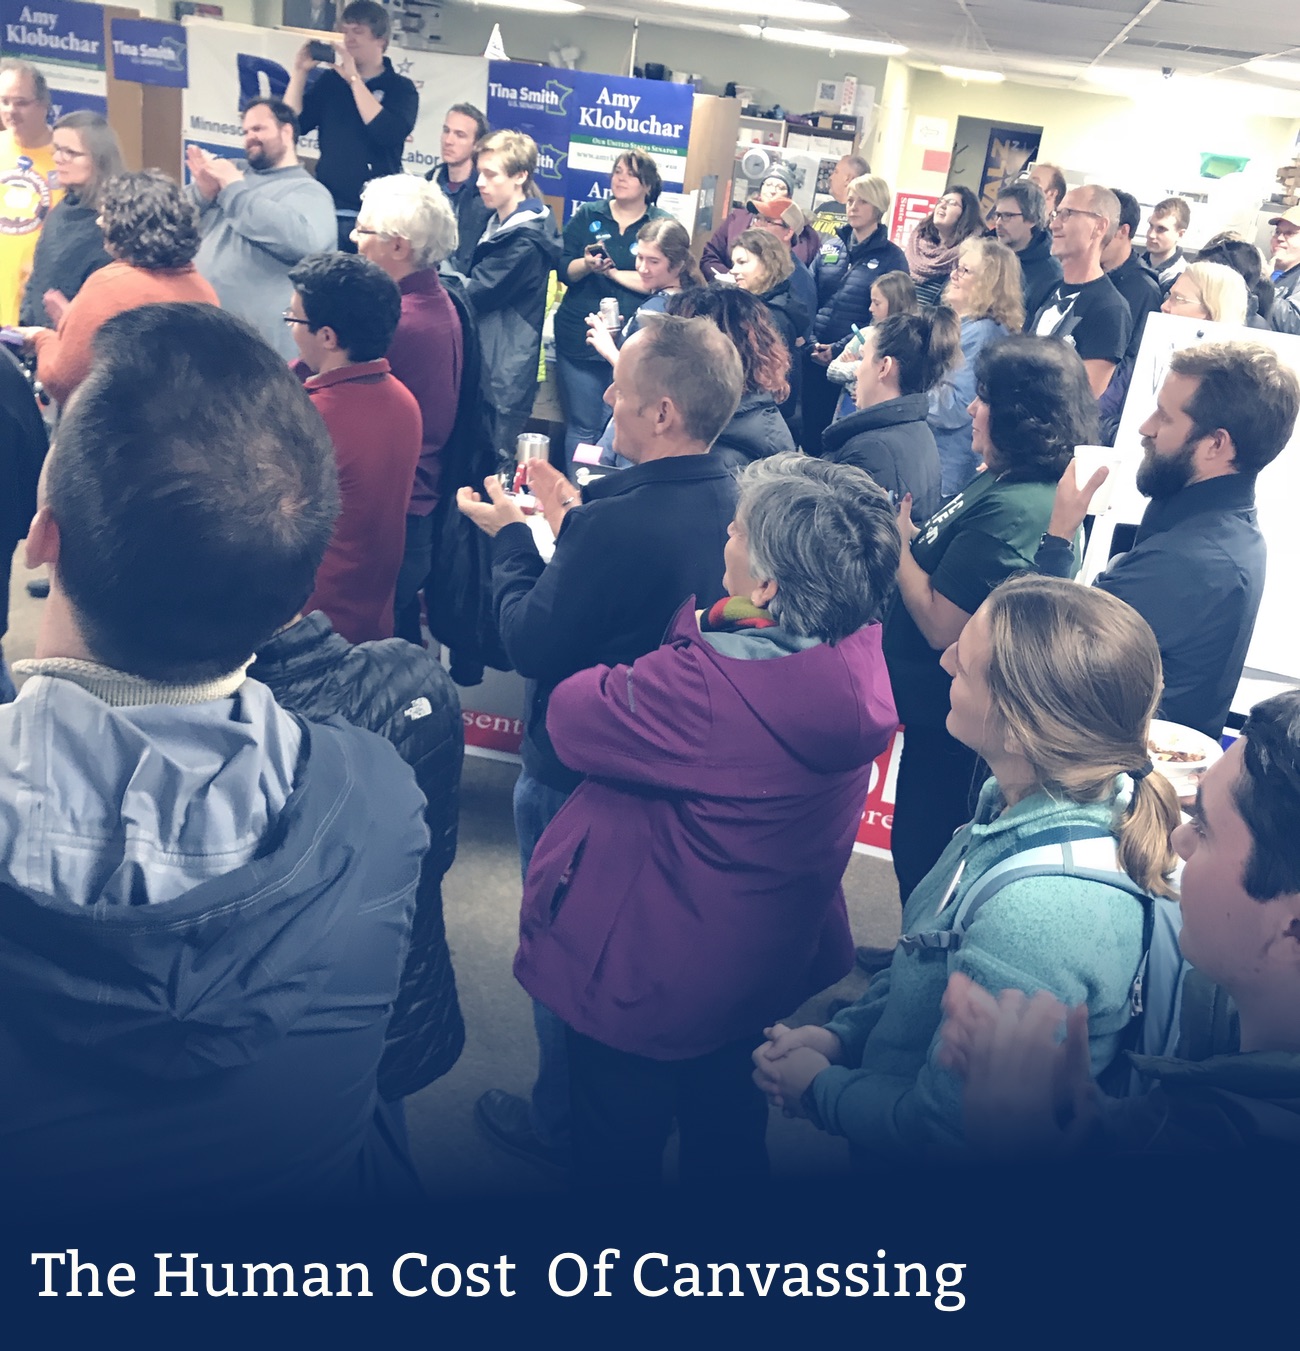 The Human Cost of Canvassing